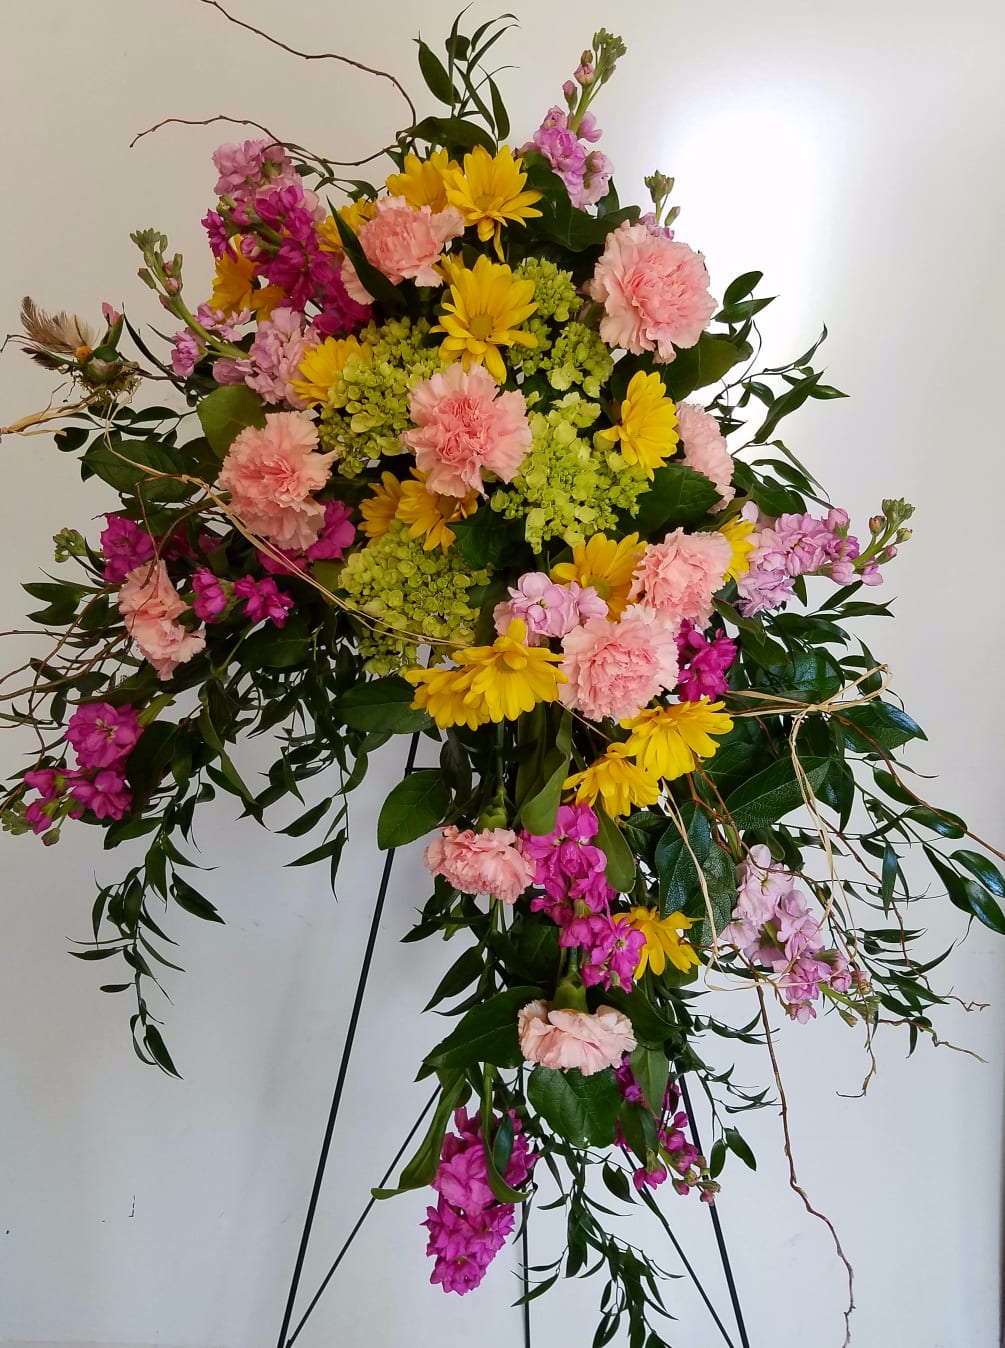 This crescent style floral tribute features green hydrangeas, pink carnations,
yellow daisies and